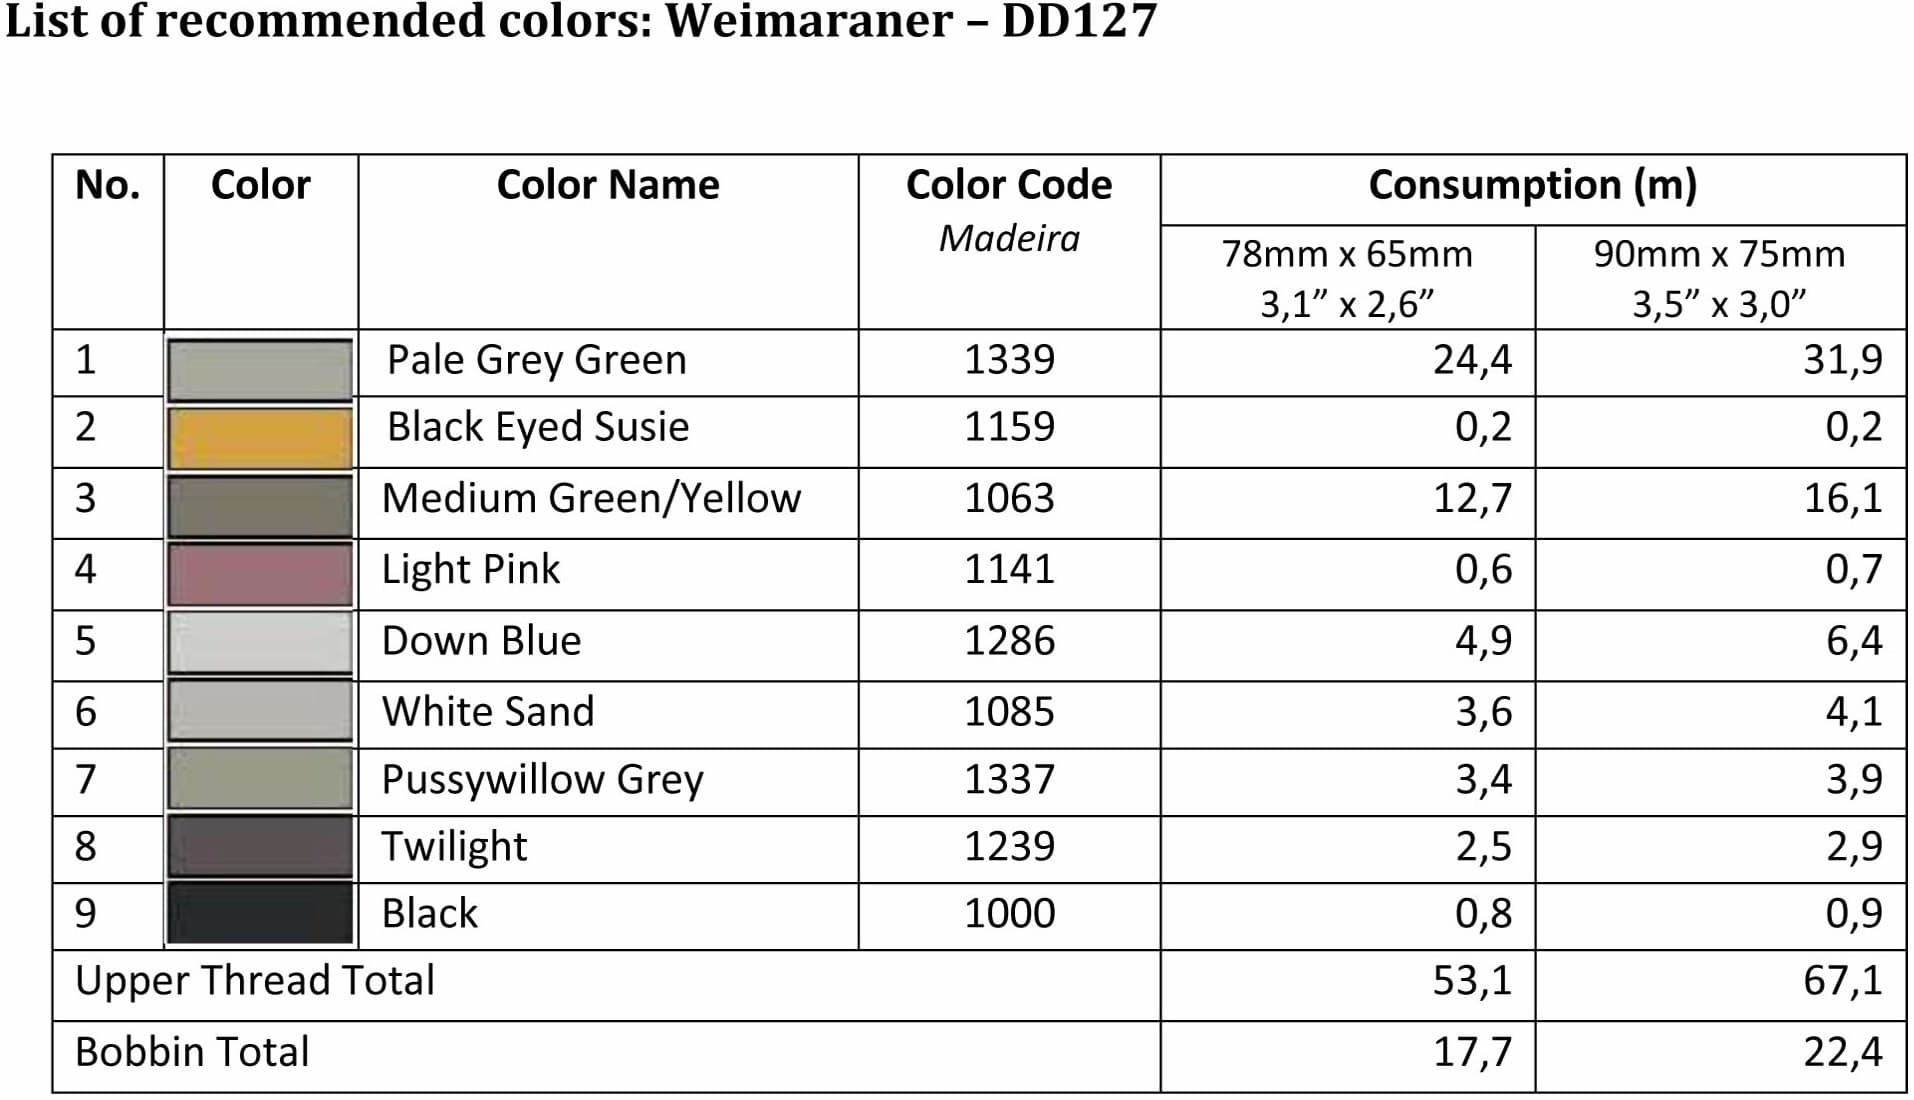 List of Recommended Colors -Weimaraner DD127